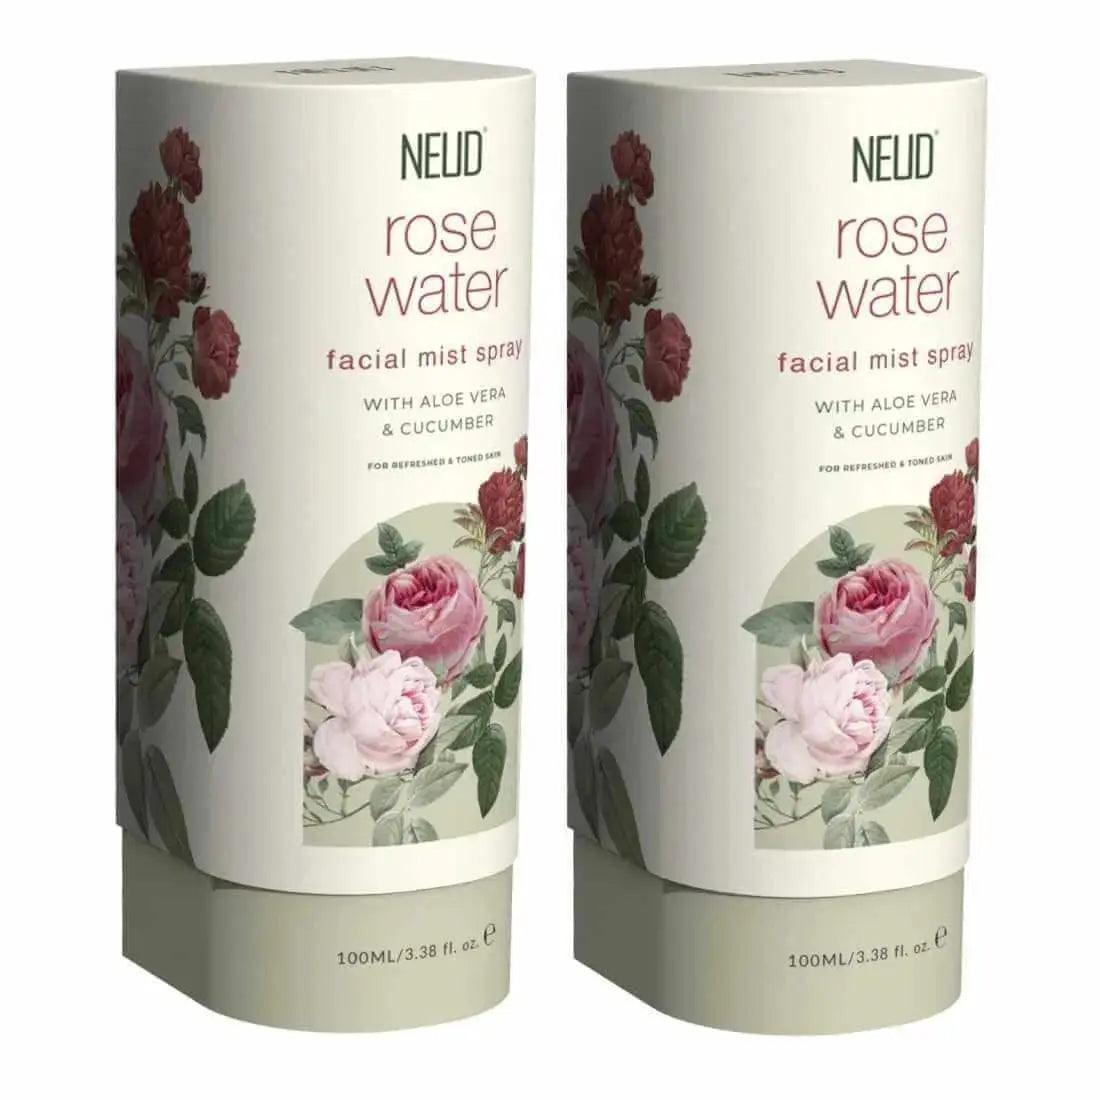 NEUD Rose Water Facial Mist Spray For Refreshed and Toned Skin - 100 ml 9559682312976